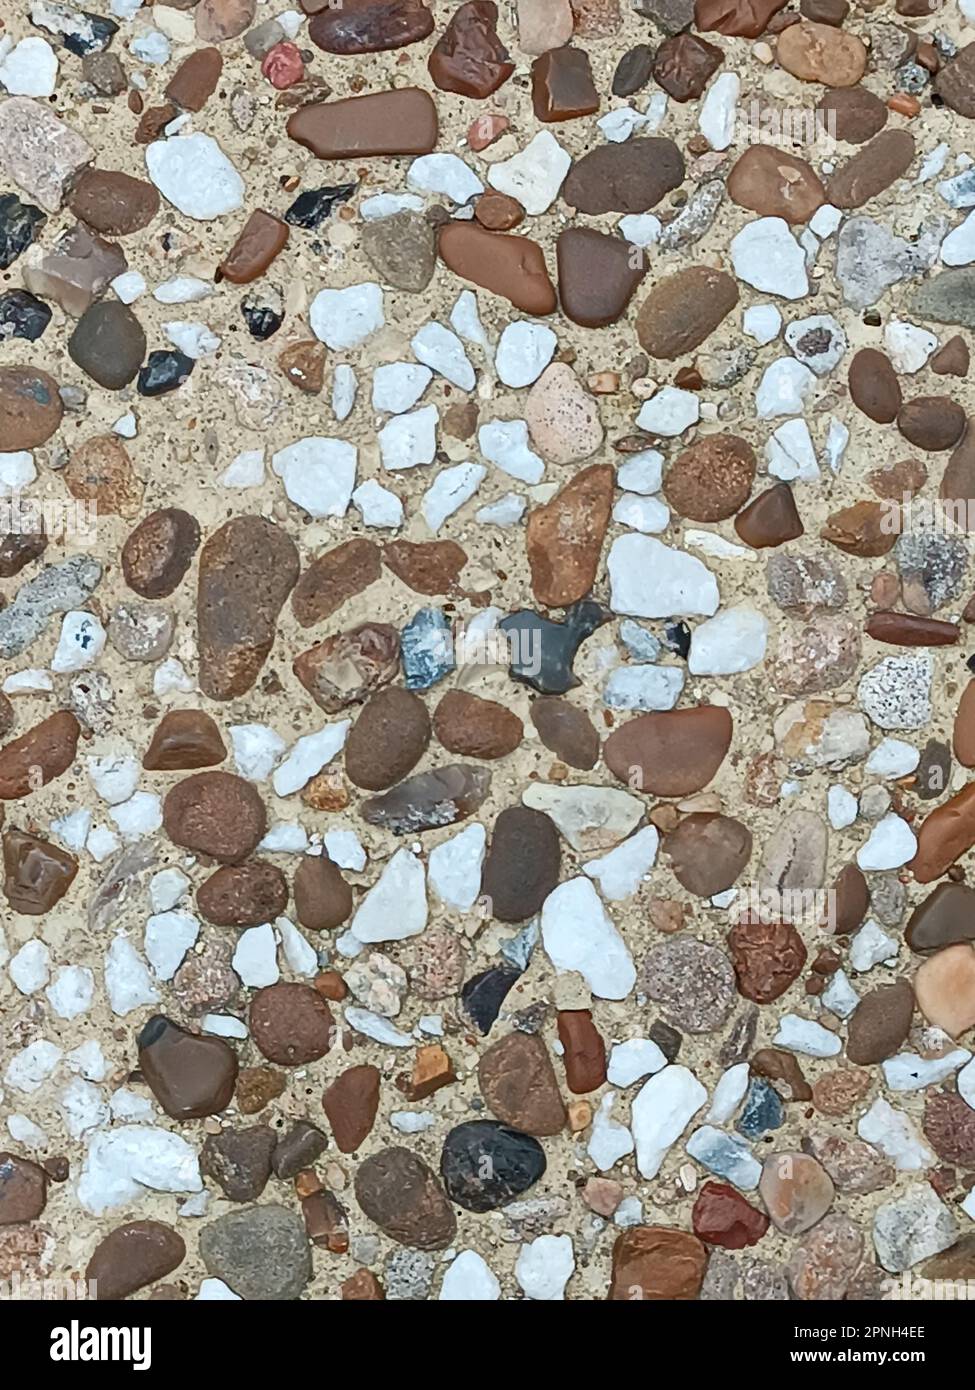 Fine gravel texture. Abstract background with small stones. Stock Photo